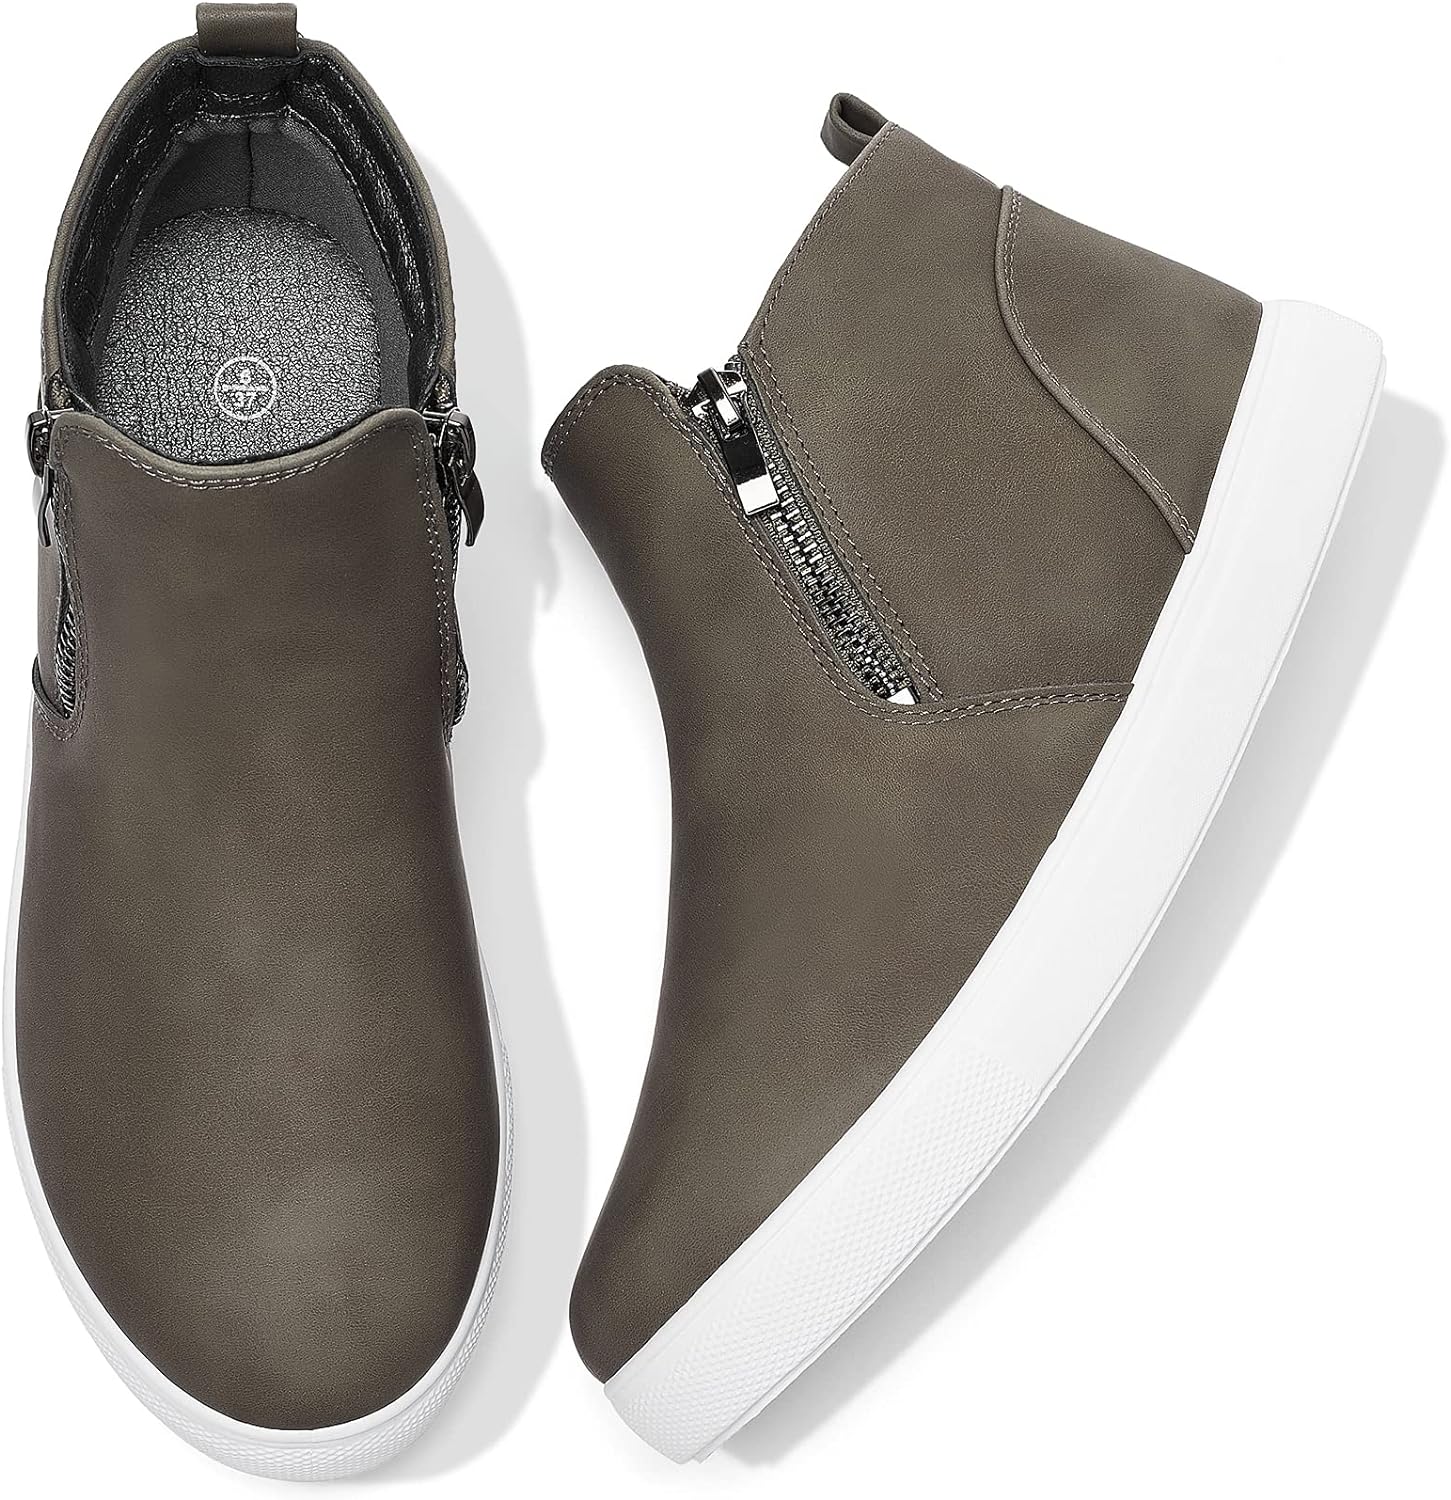 These are so comfortable and also easy to get on and off. There are no half sizes, so I think they may run a bit large. I usually wear an 8.5, but ordered an 8 and they are like a cloud. So far, holding up very nicely as well. I have ordered both the black and the camel colors